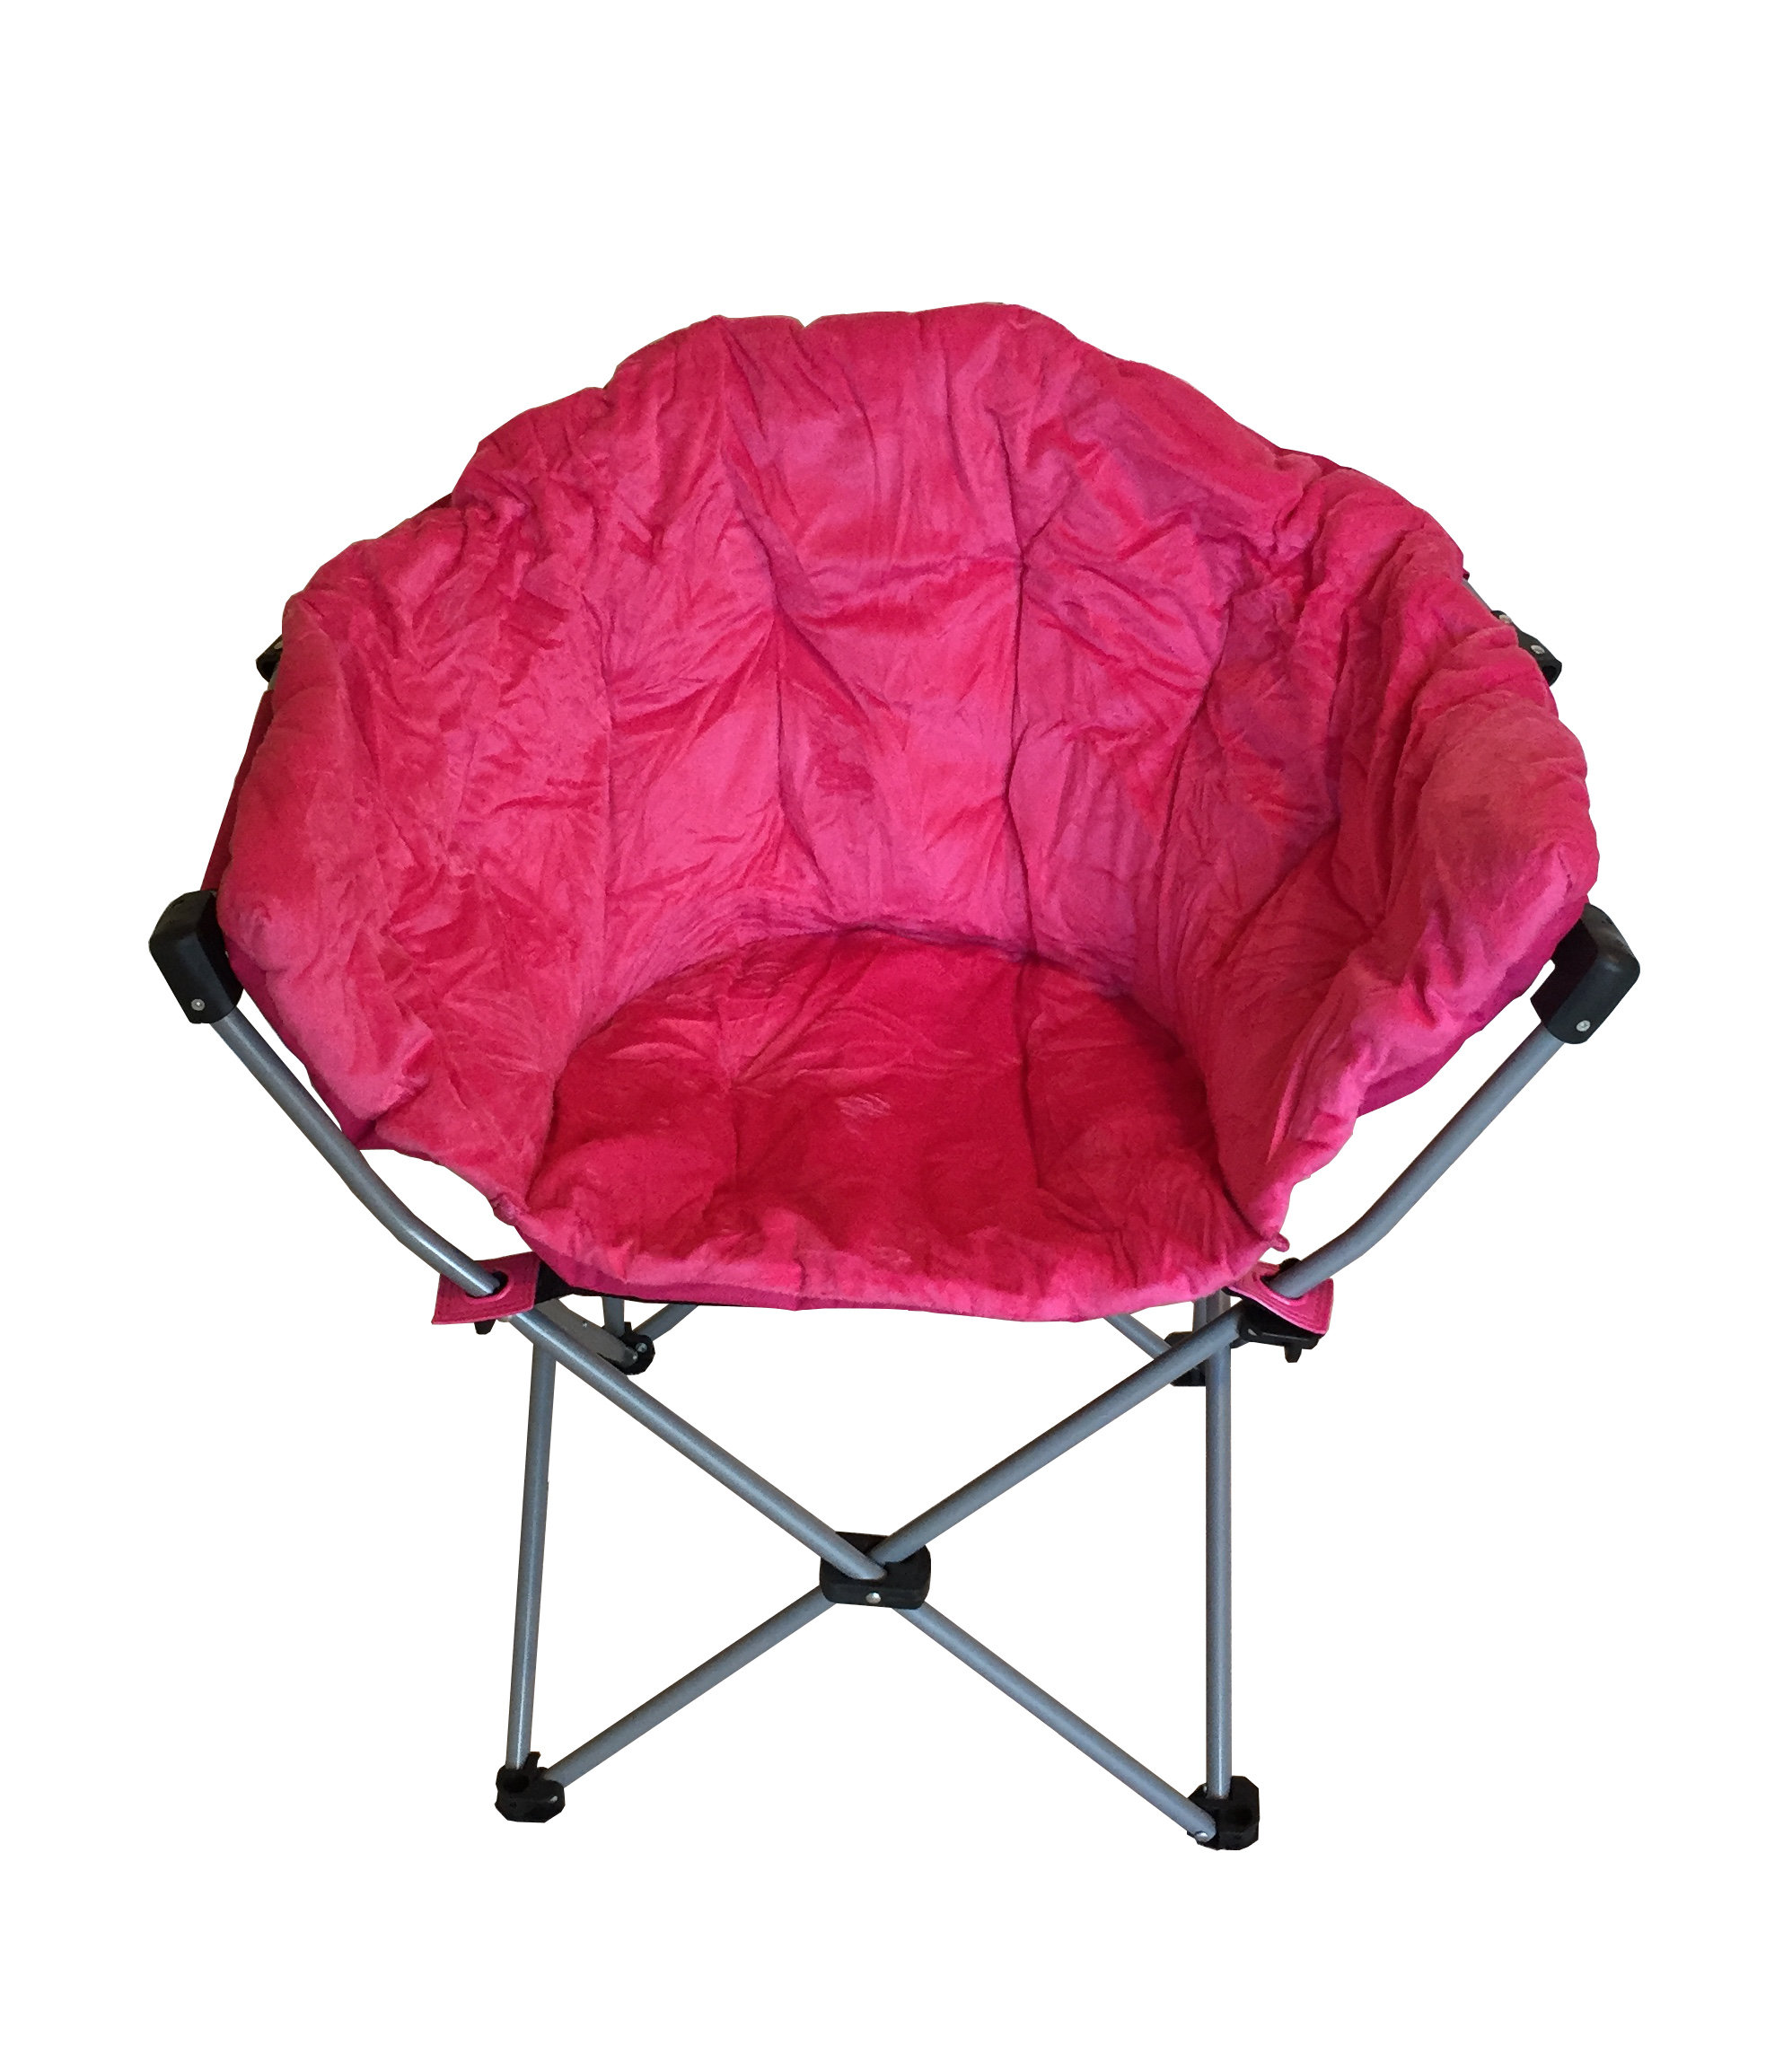 Folding Moon Chair Tufted Upholstered Camping Fishing Papasan Chairs w/ Footrest 